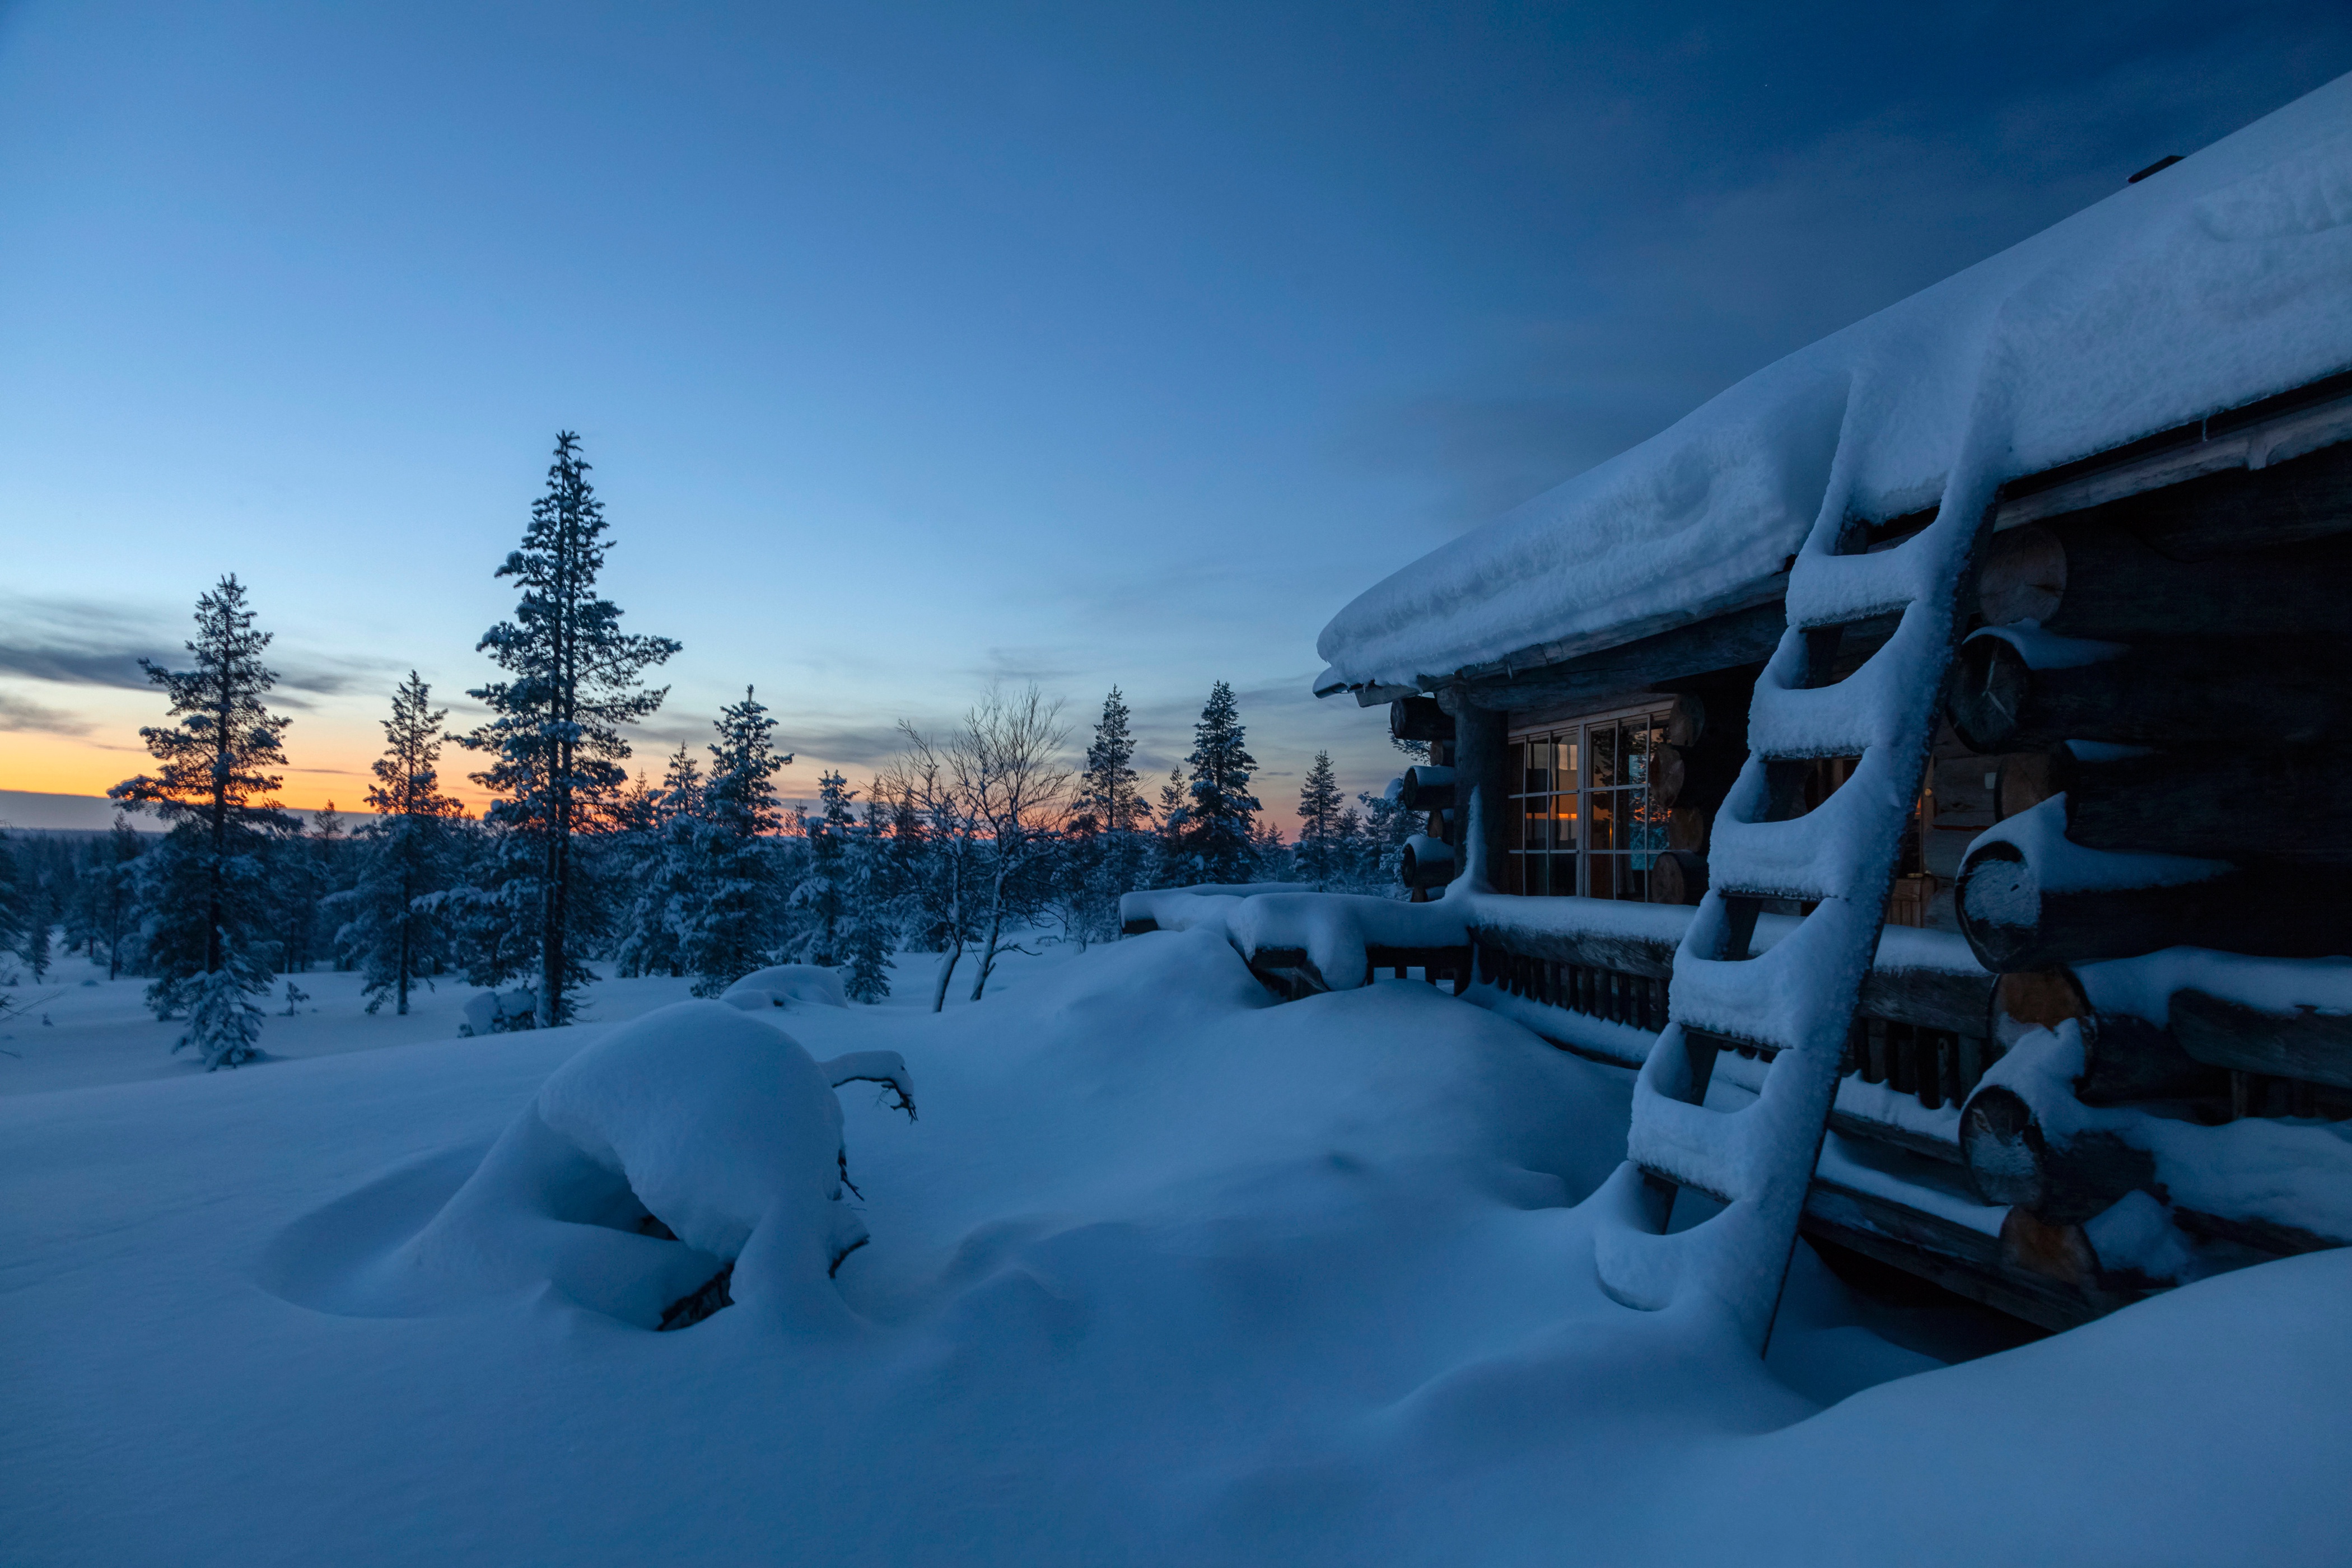 finland, photography, winter, cabin, snow, sunset